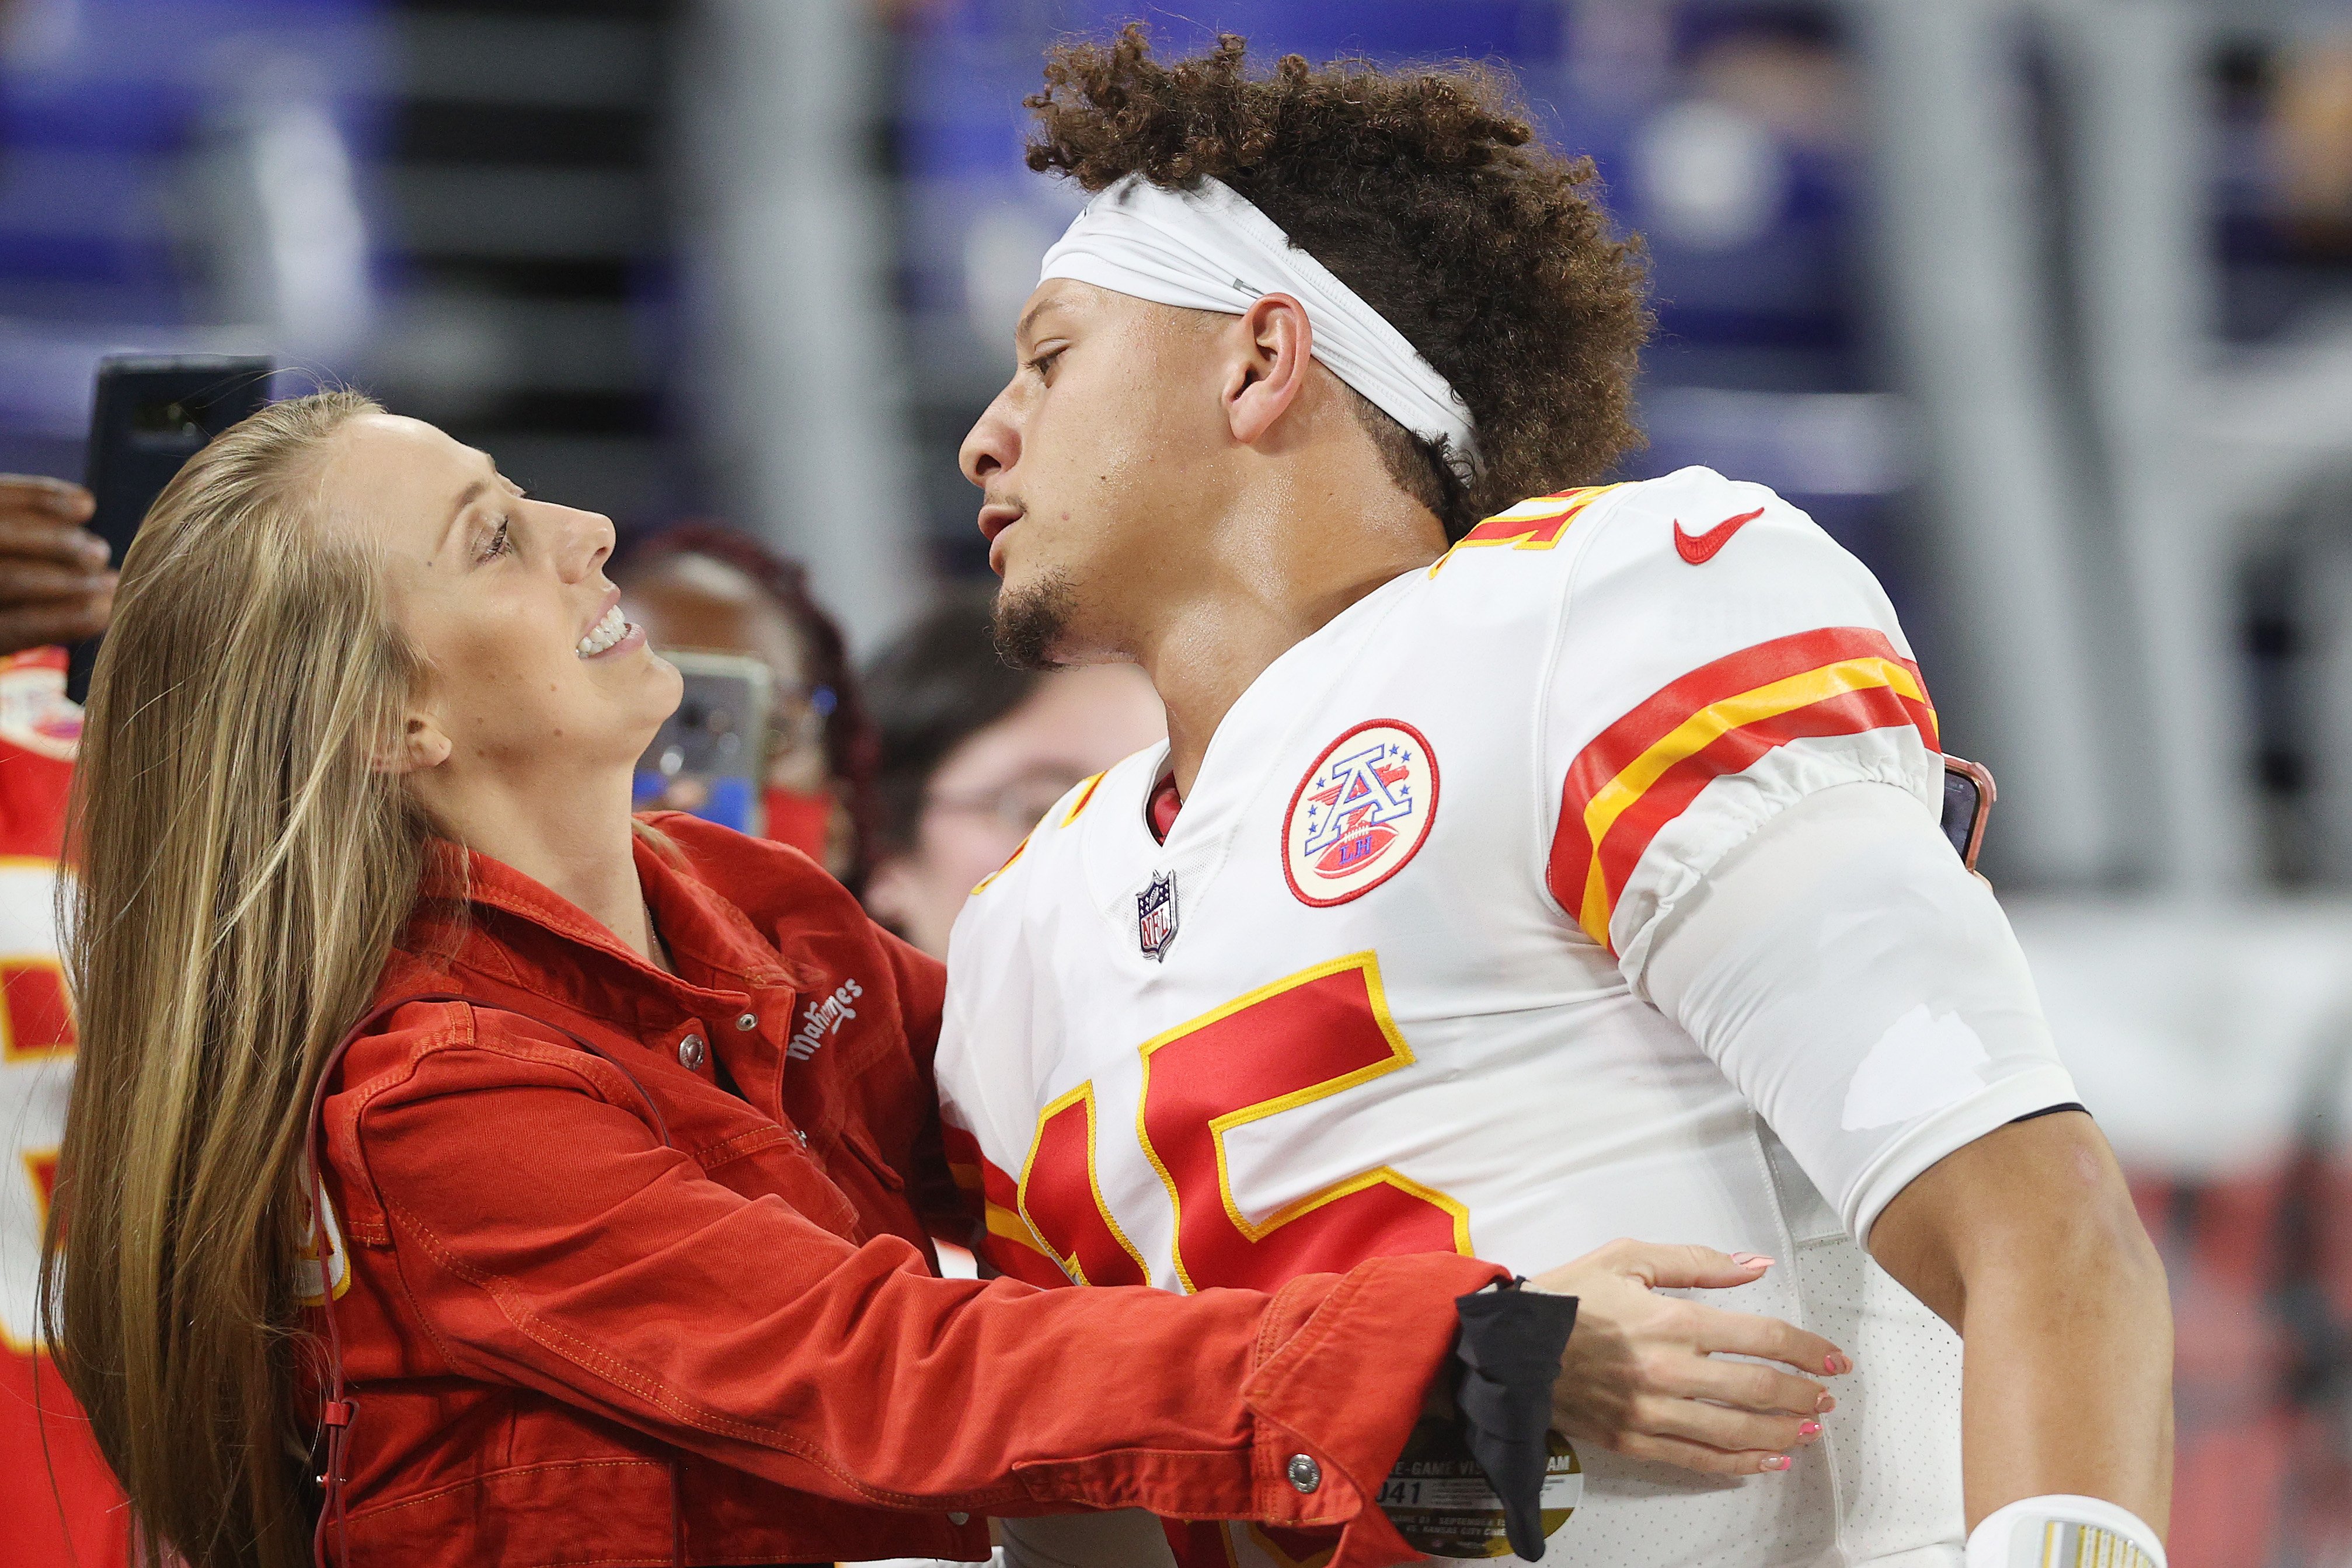 The Reason So Many NFL Fans Are Rooting Against Patrick Mahomes Has Nothing to Do With the Quarterback